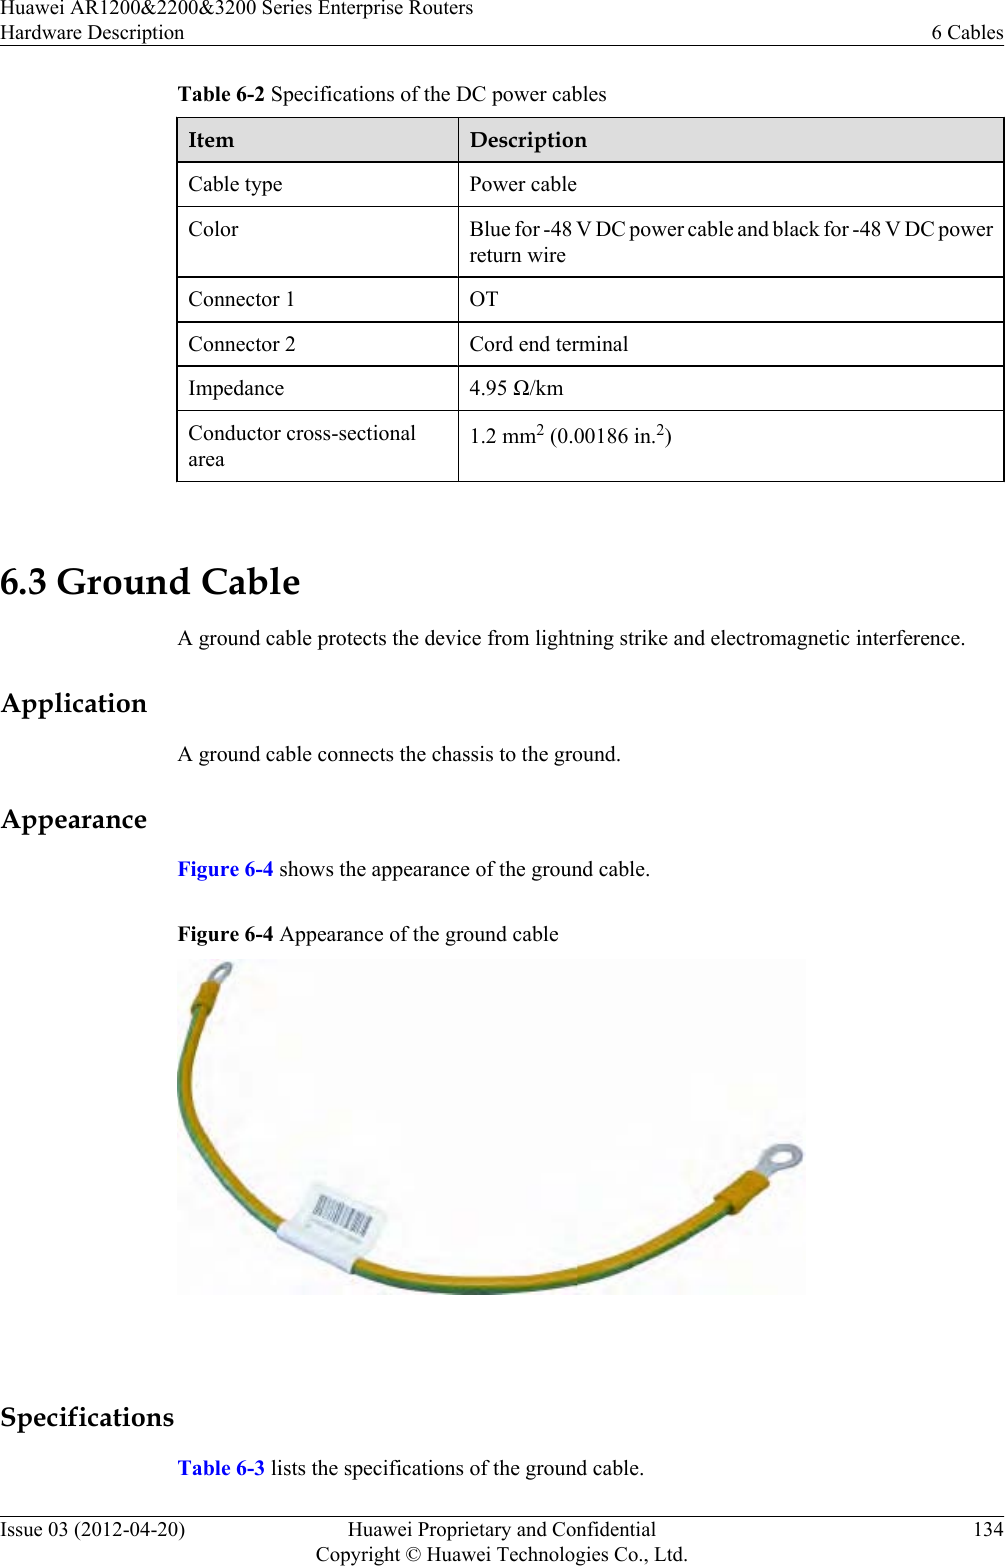 Table 6-2 Specifications of the DC power cablesItem DescriptionCable type Power cableColor Blue for -48 V DC power cable and black for -48 V DC powerreturn wireConnector 1 OTConnector 2 Cord end terminalImpedance 4.95 Ω/kmConductor cross-sectionalarea1.2 mm2 (0.00186 in.2) 6.3 Ground CableA ground cable protects the device from lightning strike and electromagnetic interference.ApplicationA ground cable connects the chassis to the ground.AppearanceFigure 6-4 shows the appearance of the ground cable.Figure 6-4 Appearance of the ground cable SpecificationsTable 6-3 lists the specifications of the ground cable.Huawei AR1200&amp;2200&amp;3200 Series Enterprise RoutersHardware Description 6 CablesIssue 03 (2012-04-20) Huawei Proprietary and ConfidentialCopyright © Huawei Technologies Co., Ltd.134